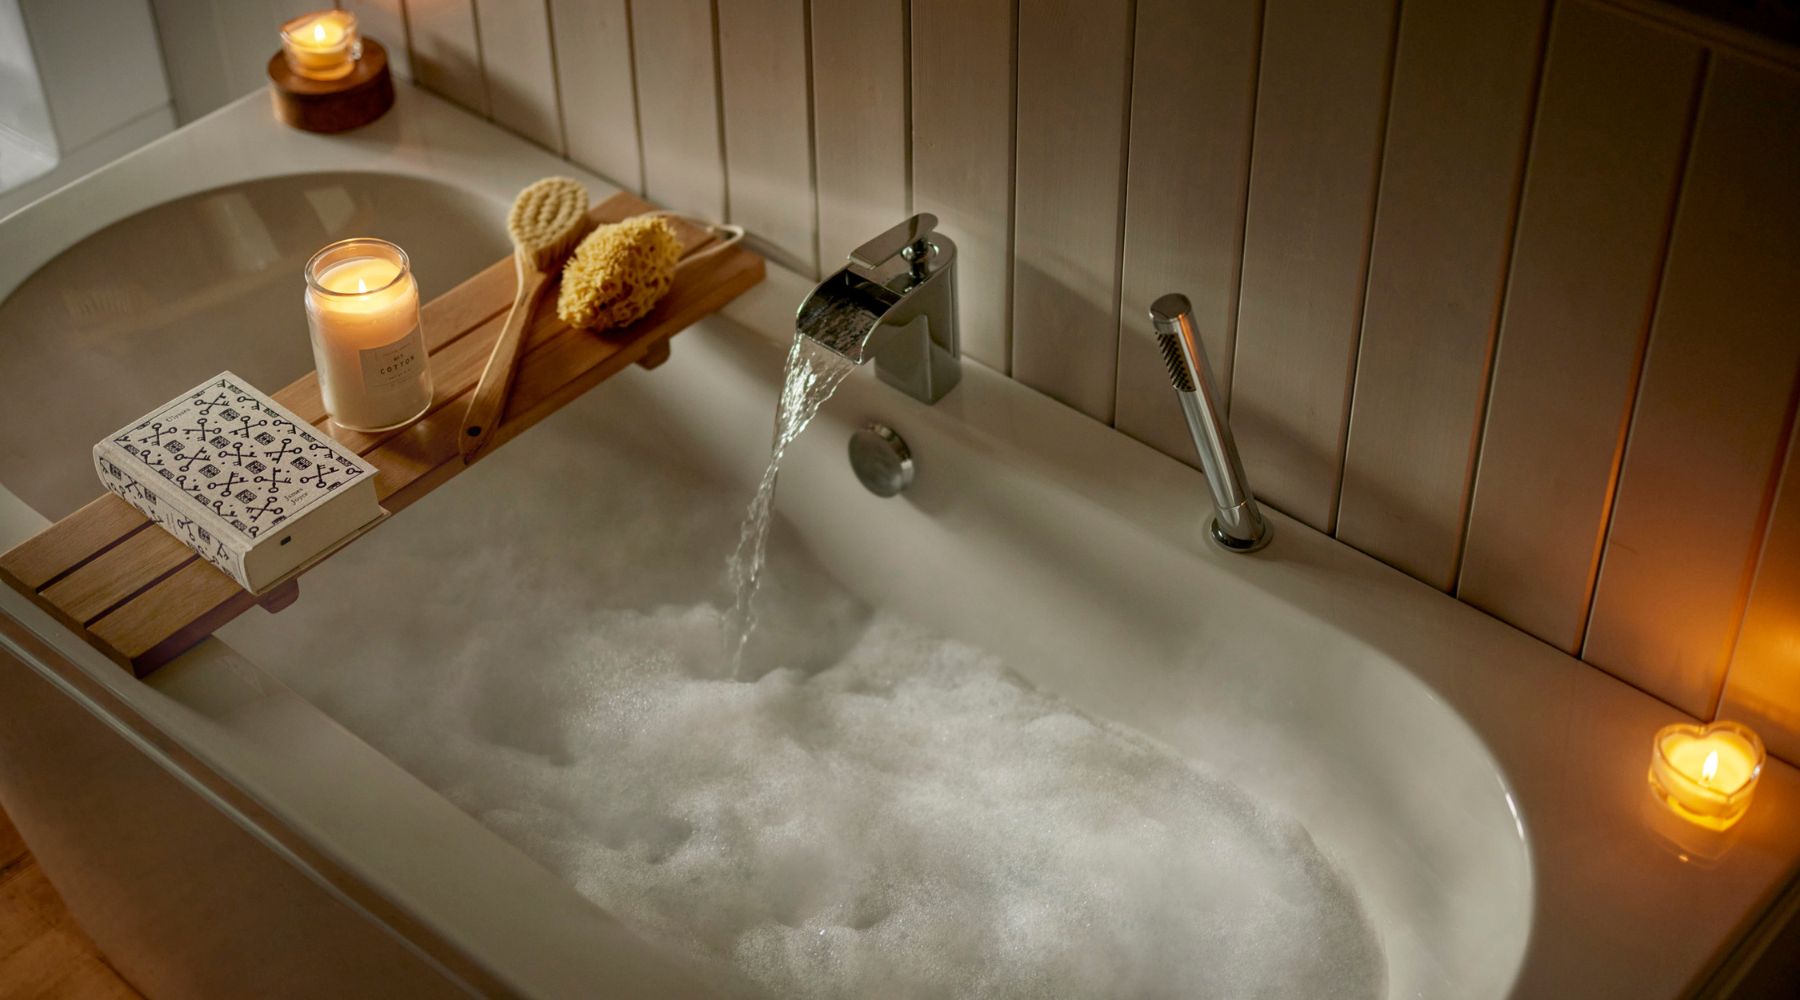 Omaze Million Pound House Lake District  - Bubble bath with candles and wooden rack with book